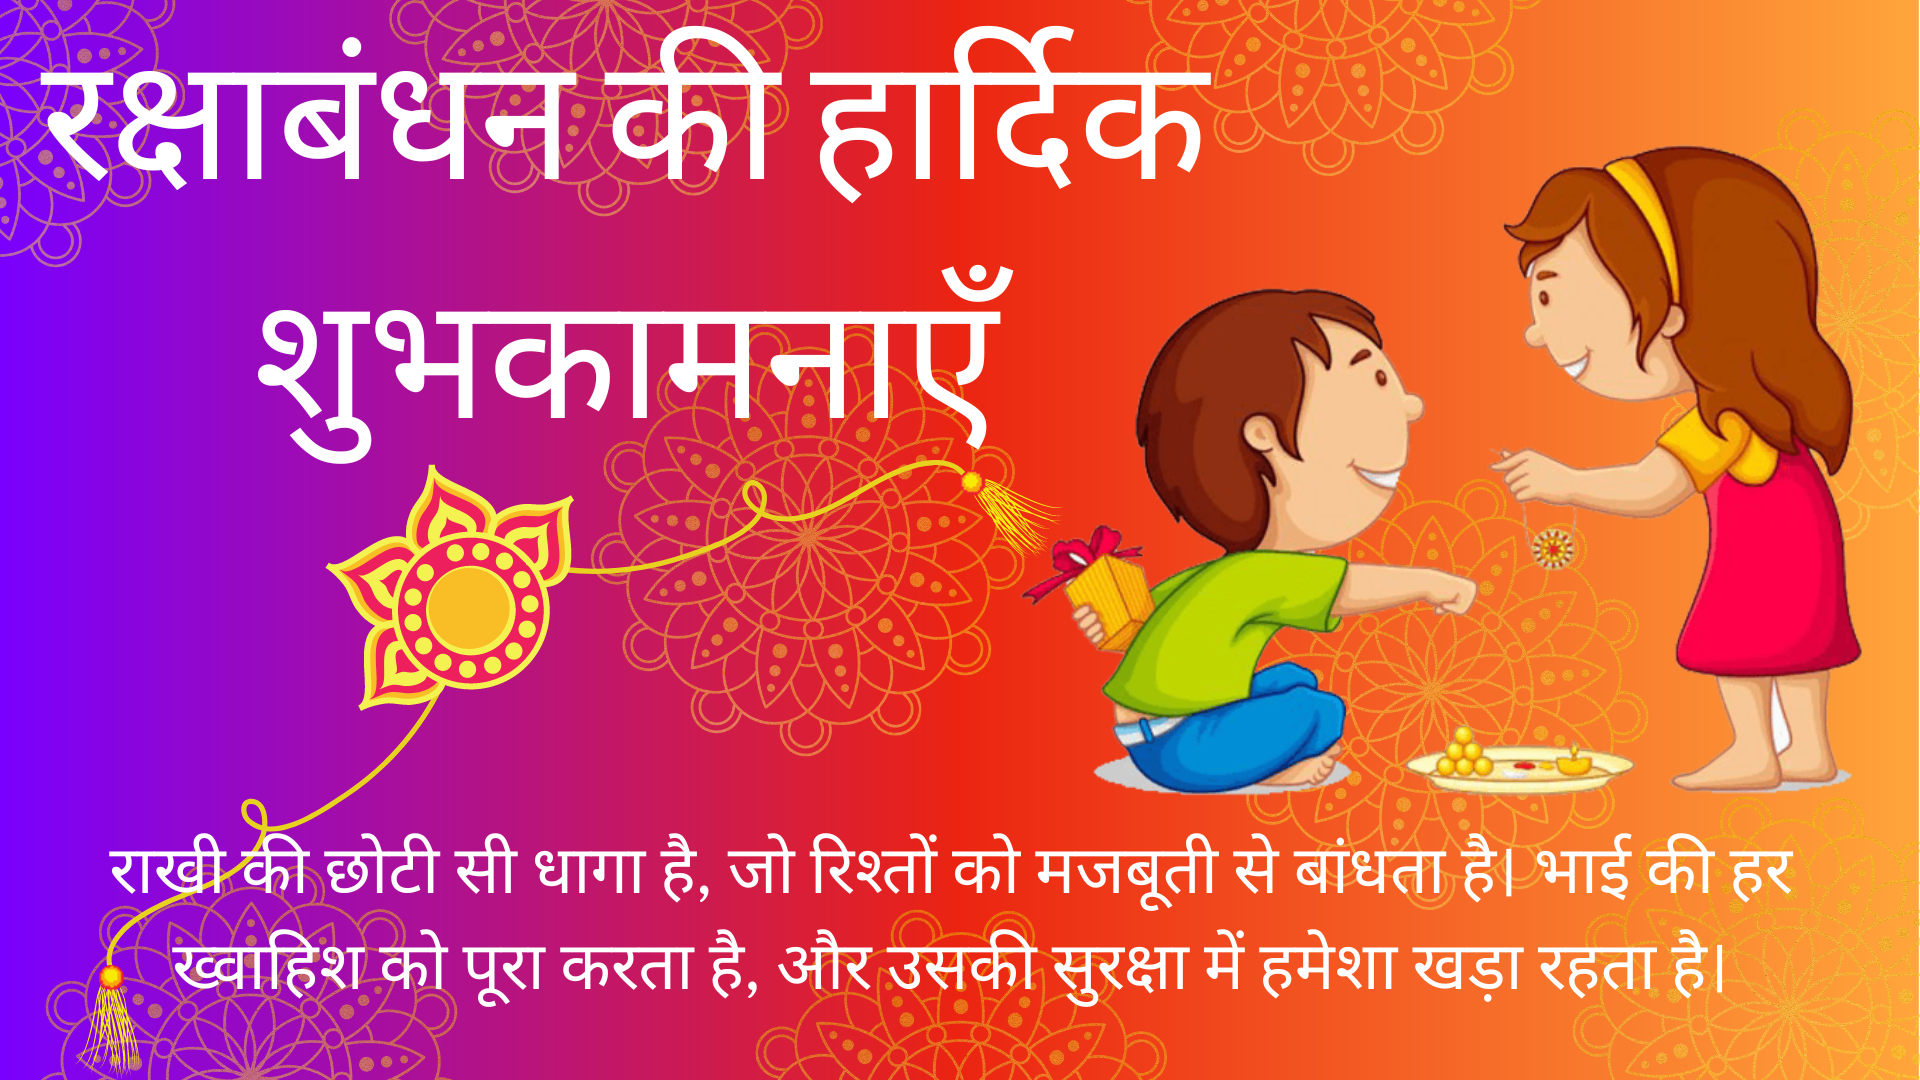 Download Free Raksha Bandhan Festival Wishes in Hindi for Websites, Slideshows, and Designs | Royalty-Free and Unlimited Use.